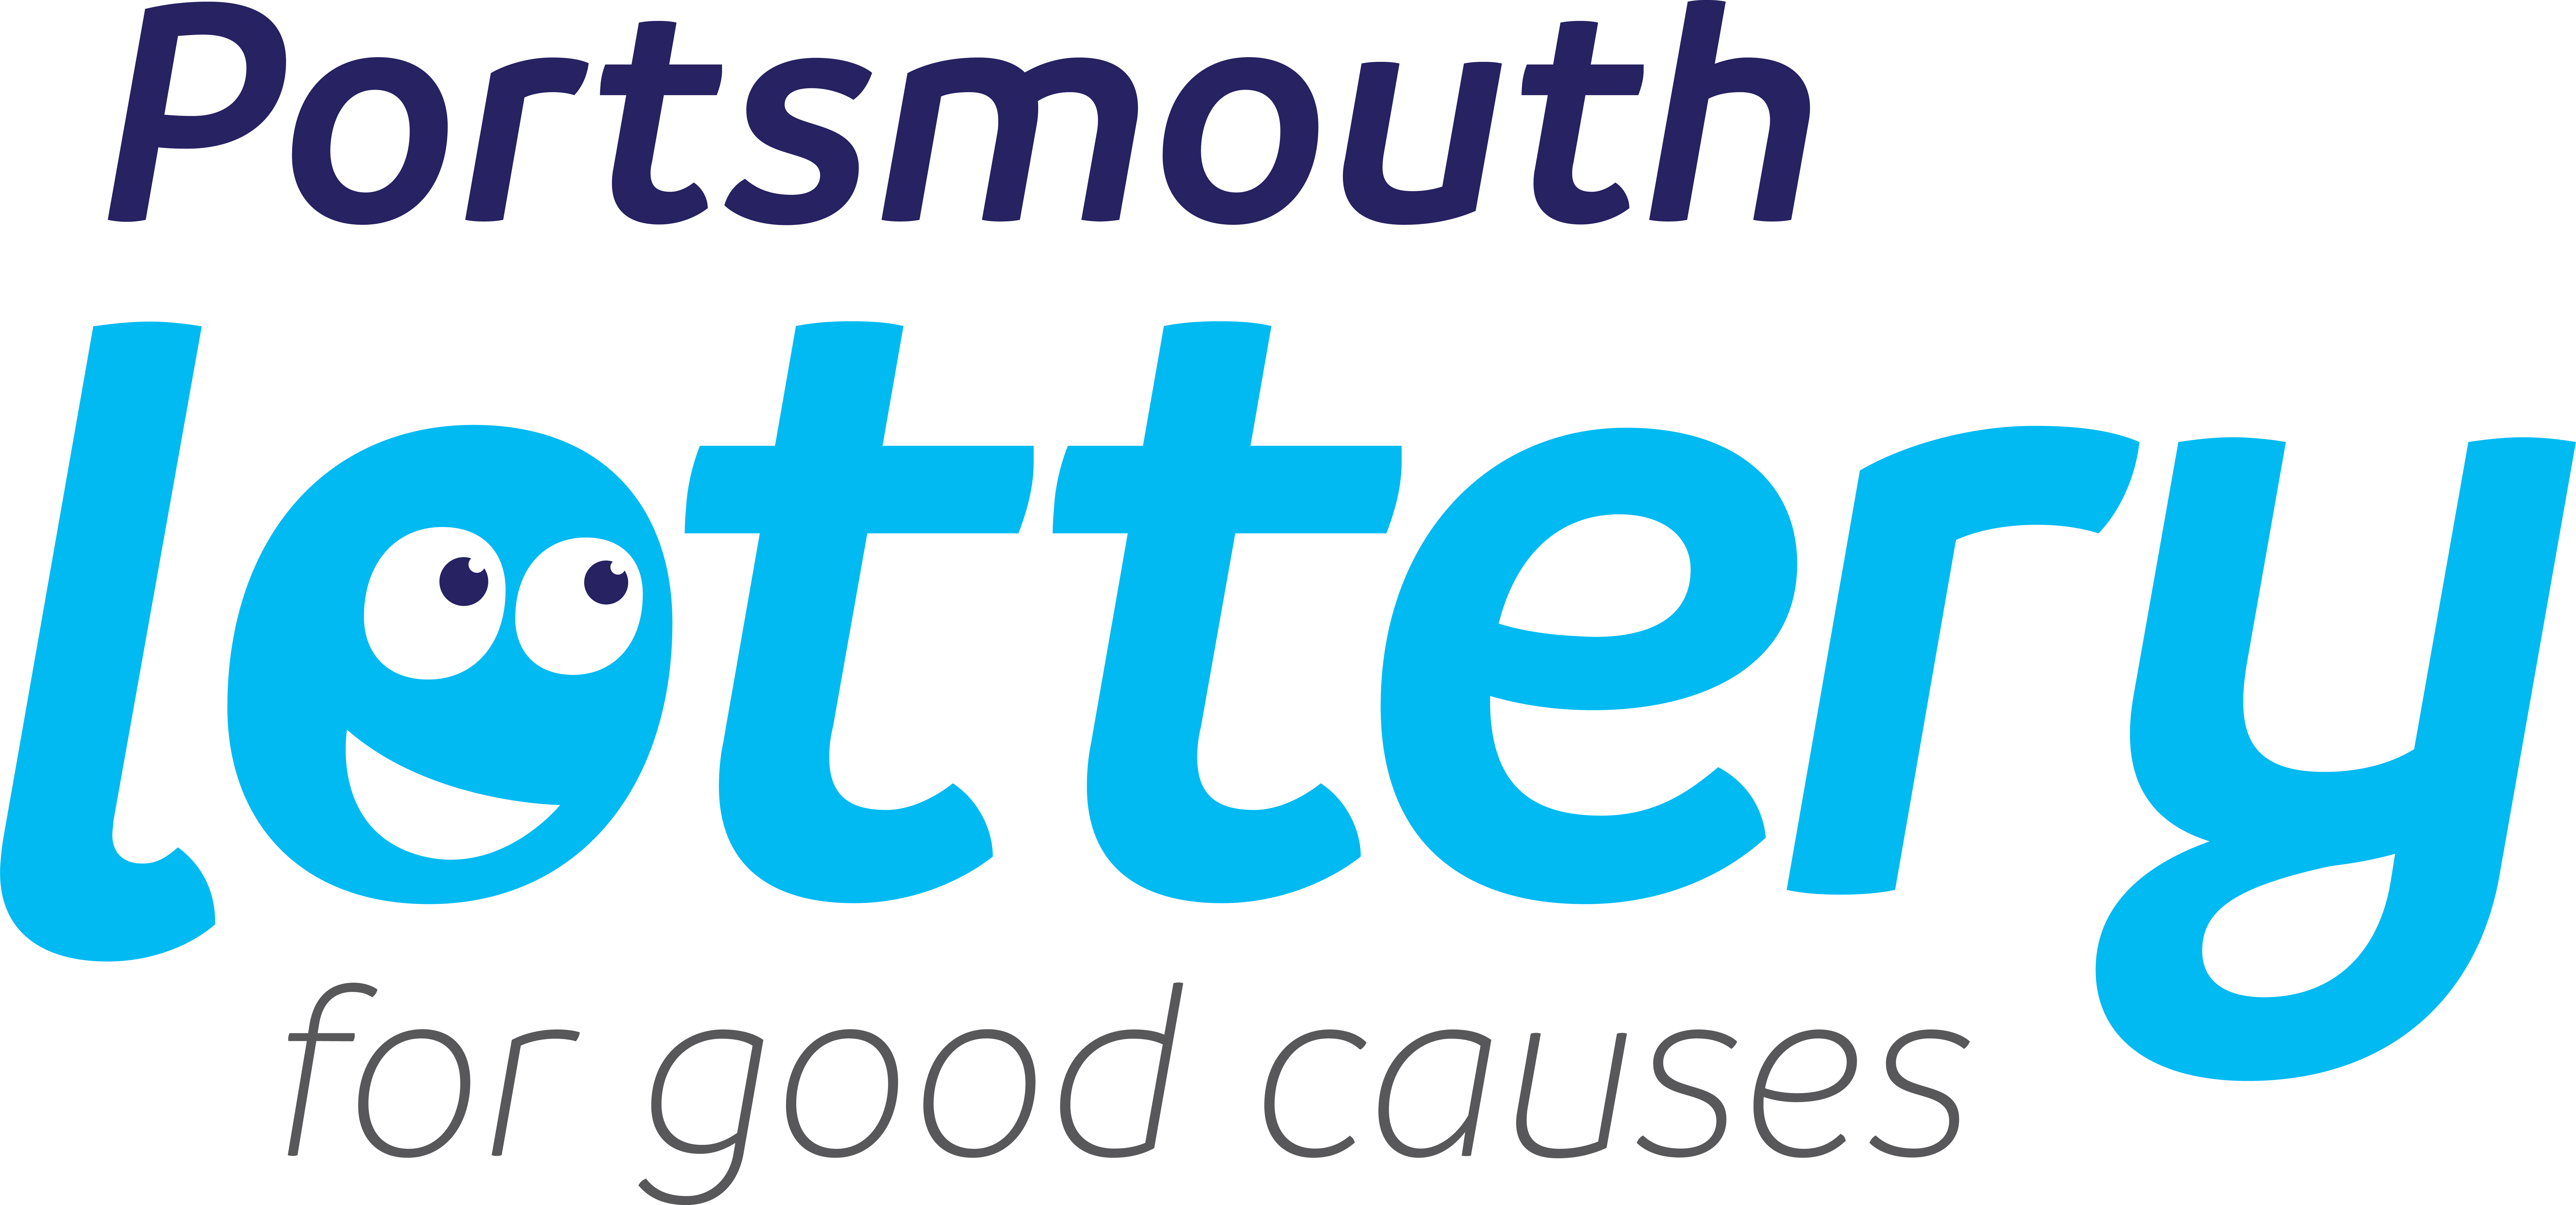 Portsmouth Lottery Small Grants